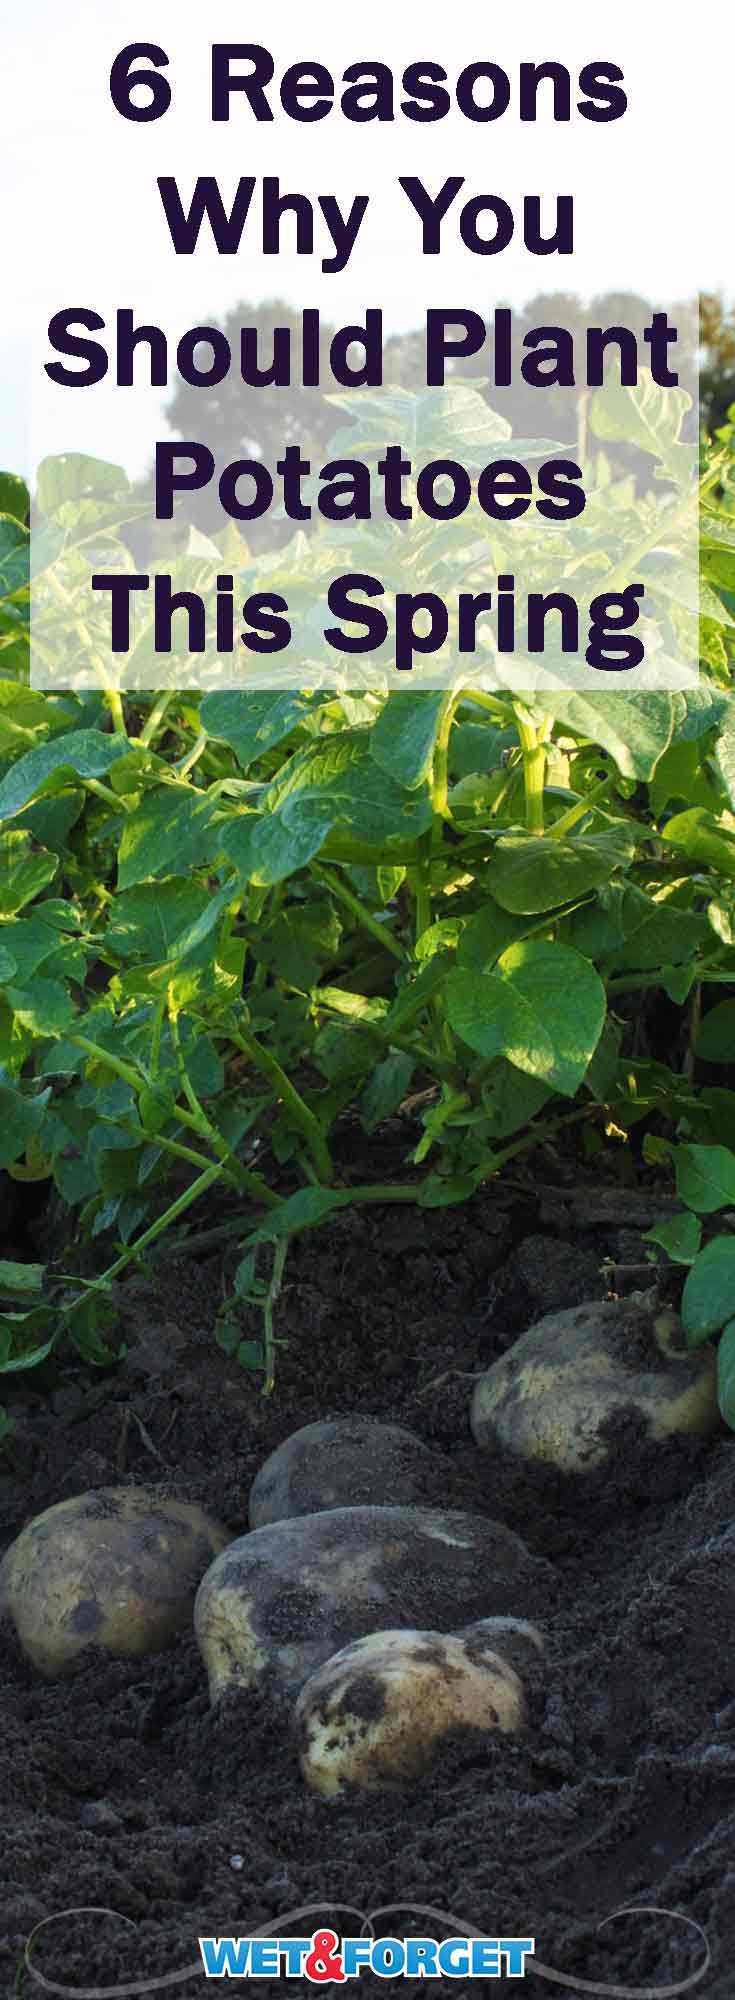 Not only are potato plants are very easy to maintain they are also available in a wide variety of colors. Find out more reasons why potatoes are one of the best plants to grow this spring! 